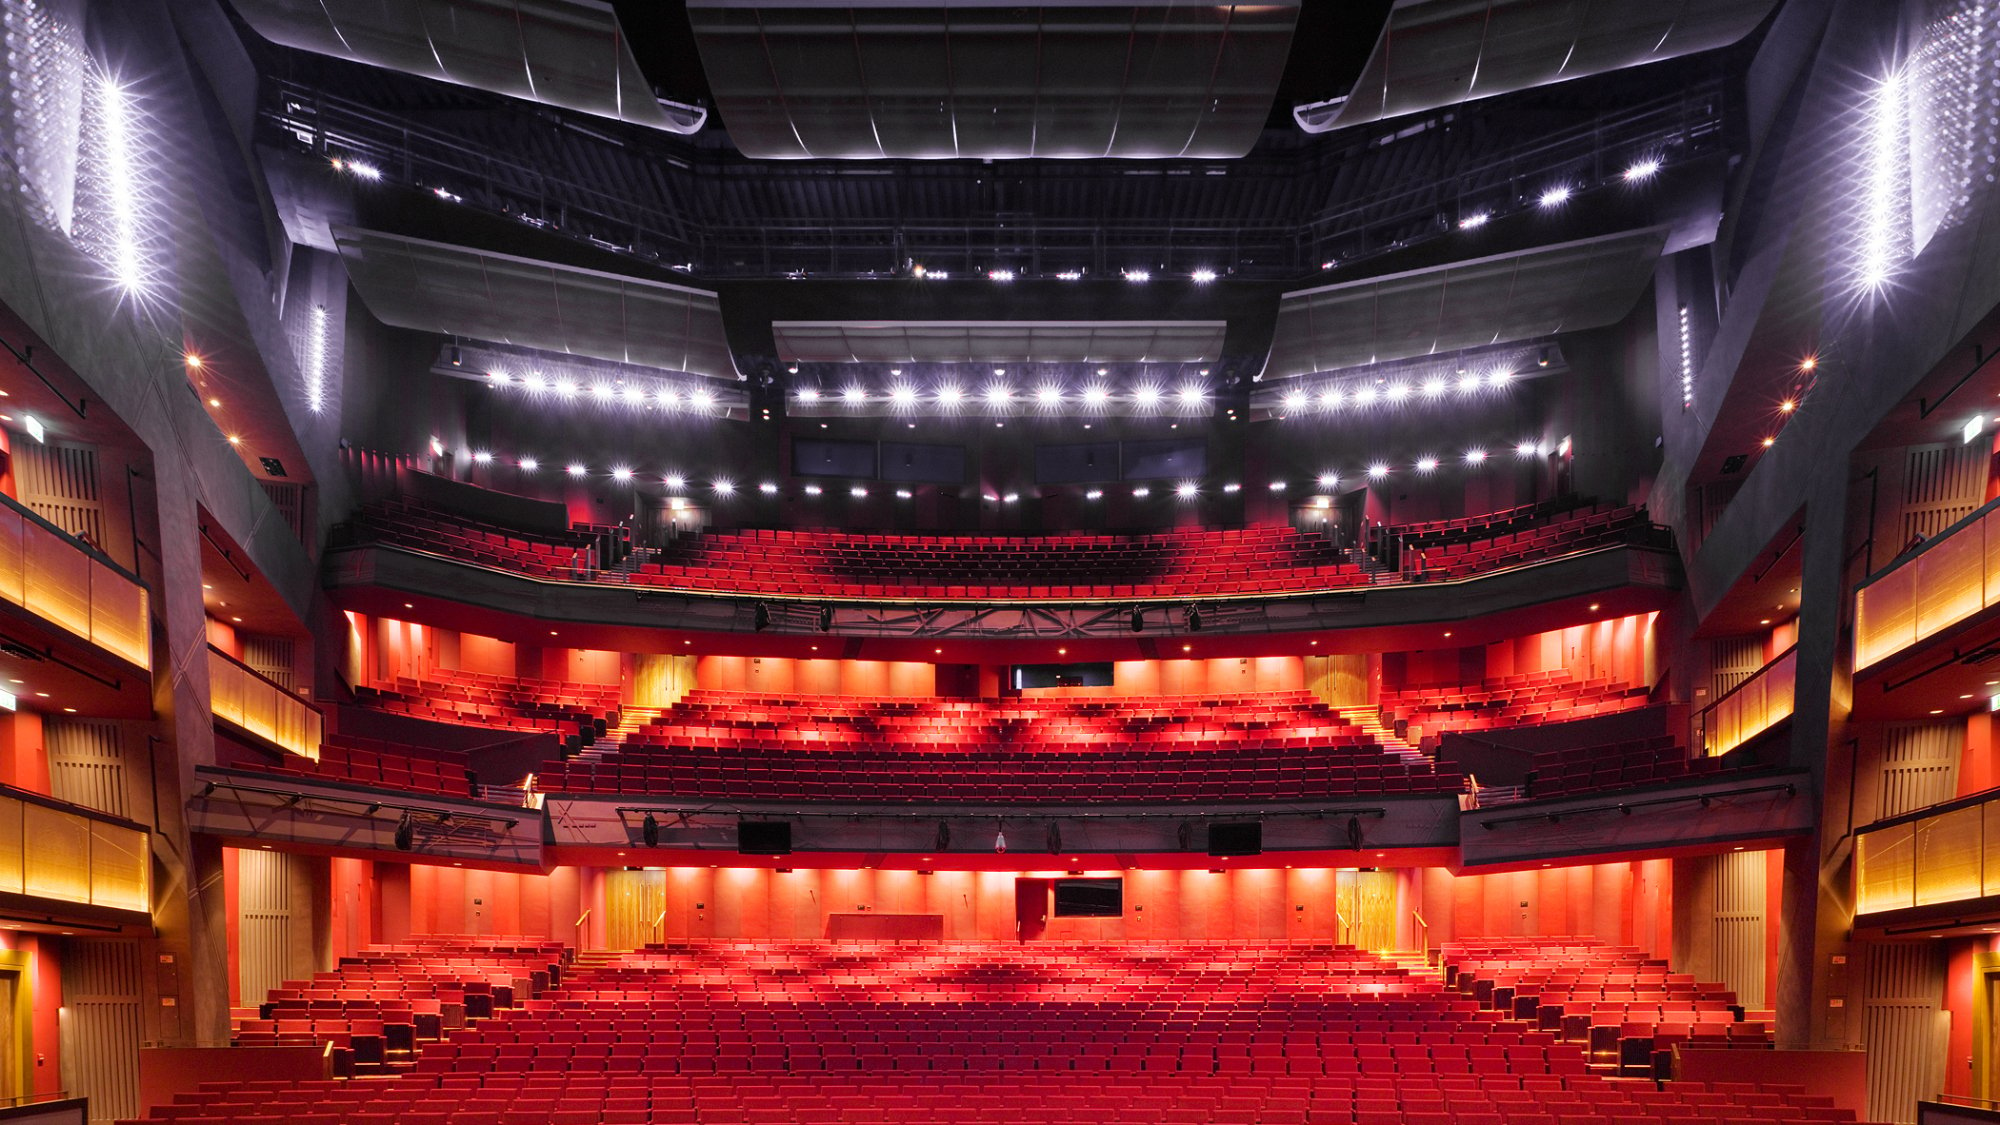 View of the seats in the Bord Gáis Energy Theatre, taken from the stage.